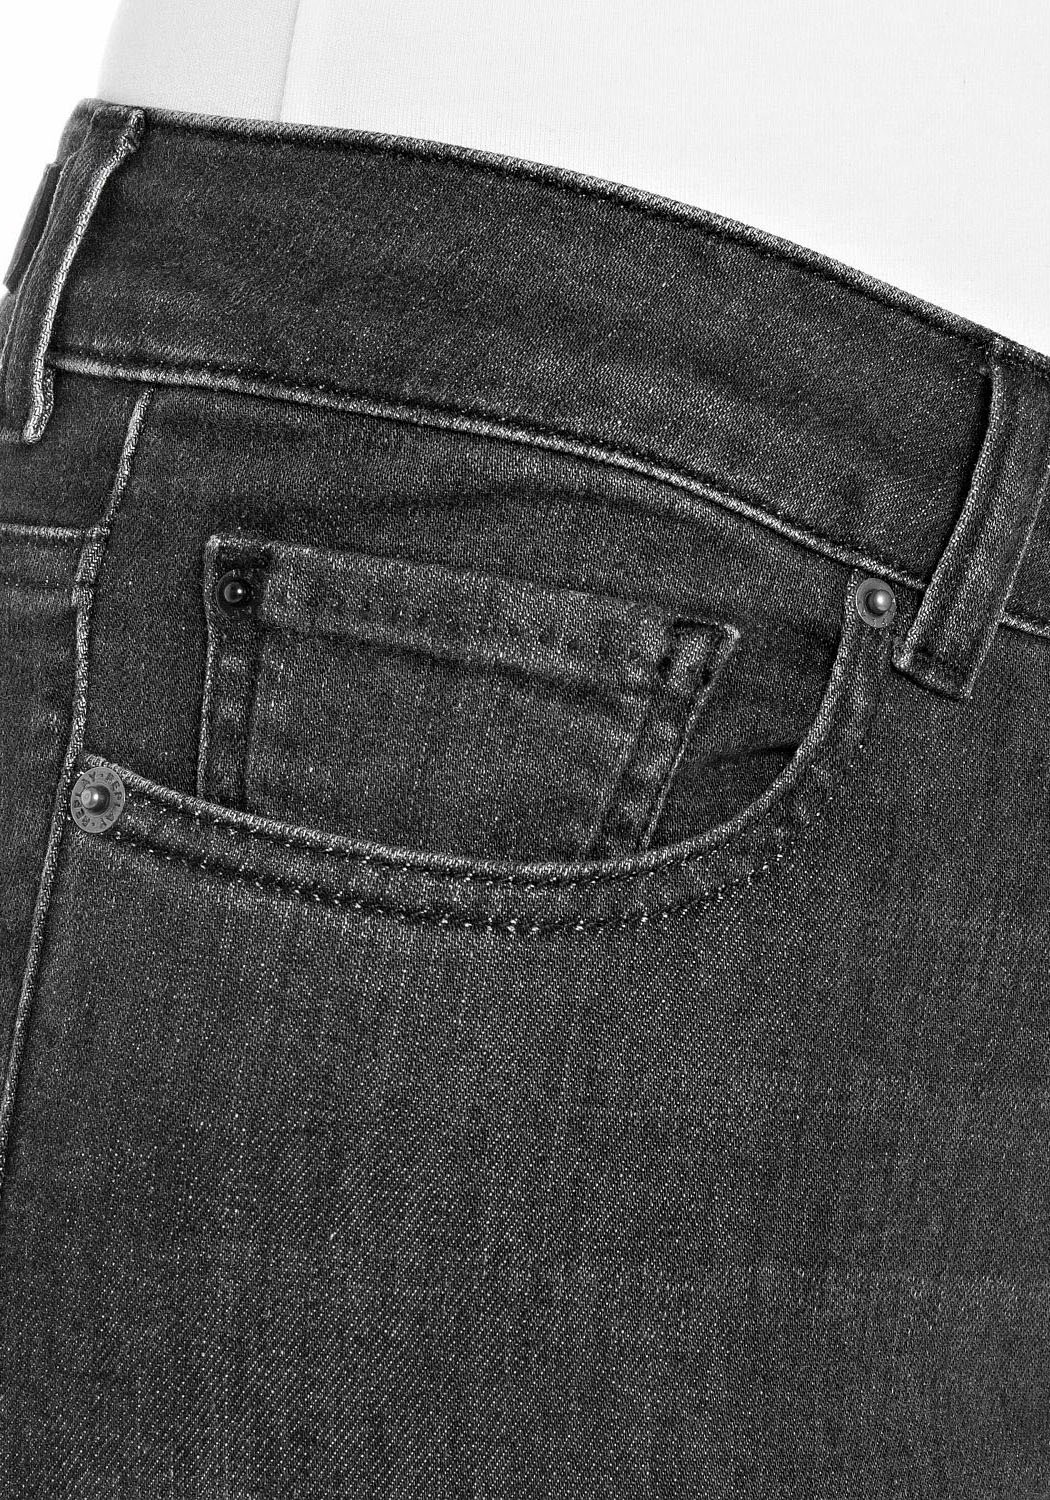 ♕ »Faaby« Slim-fit-Jeans bei Replay